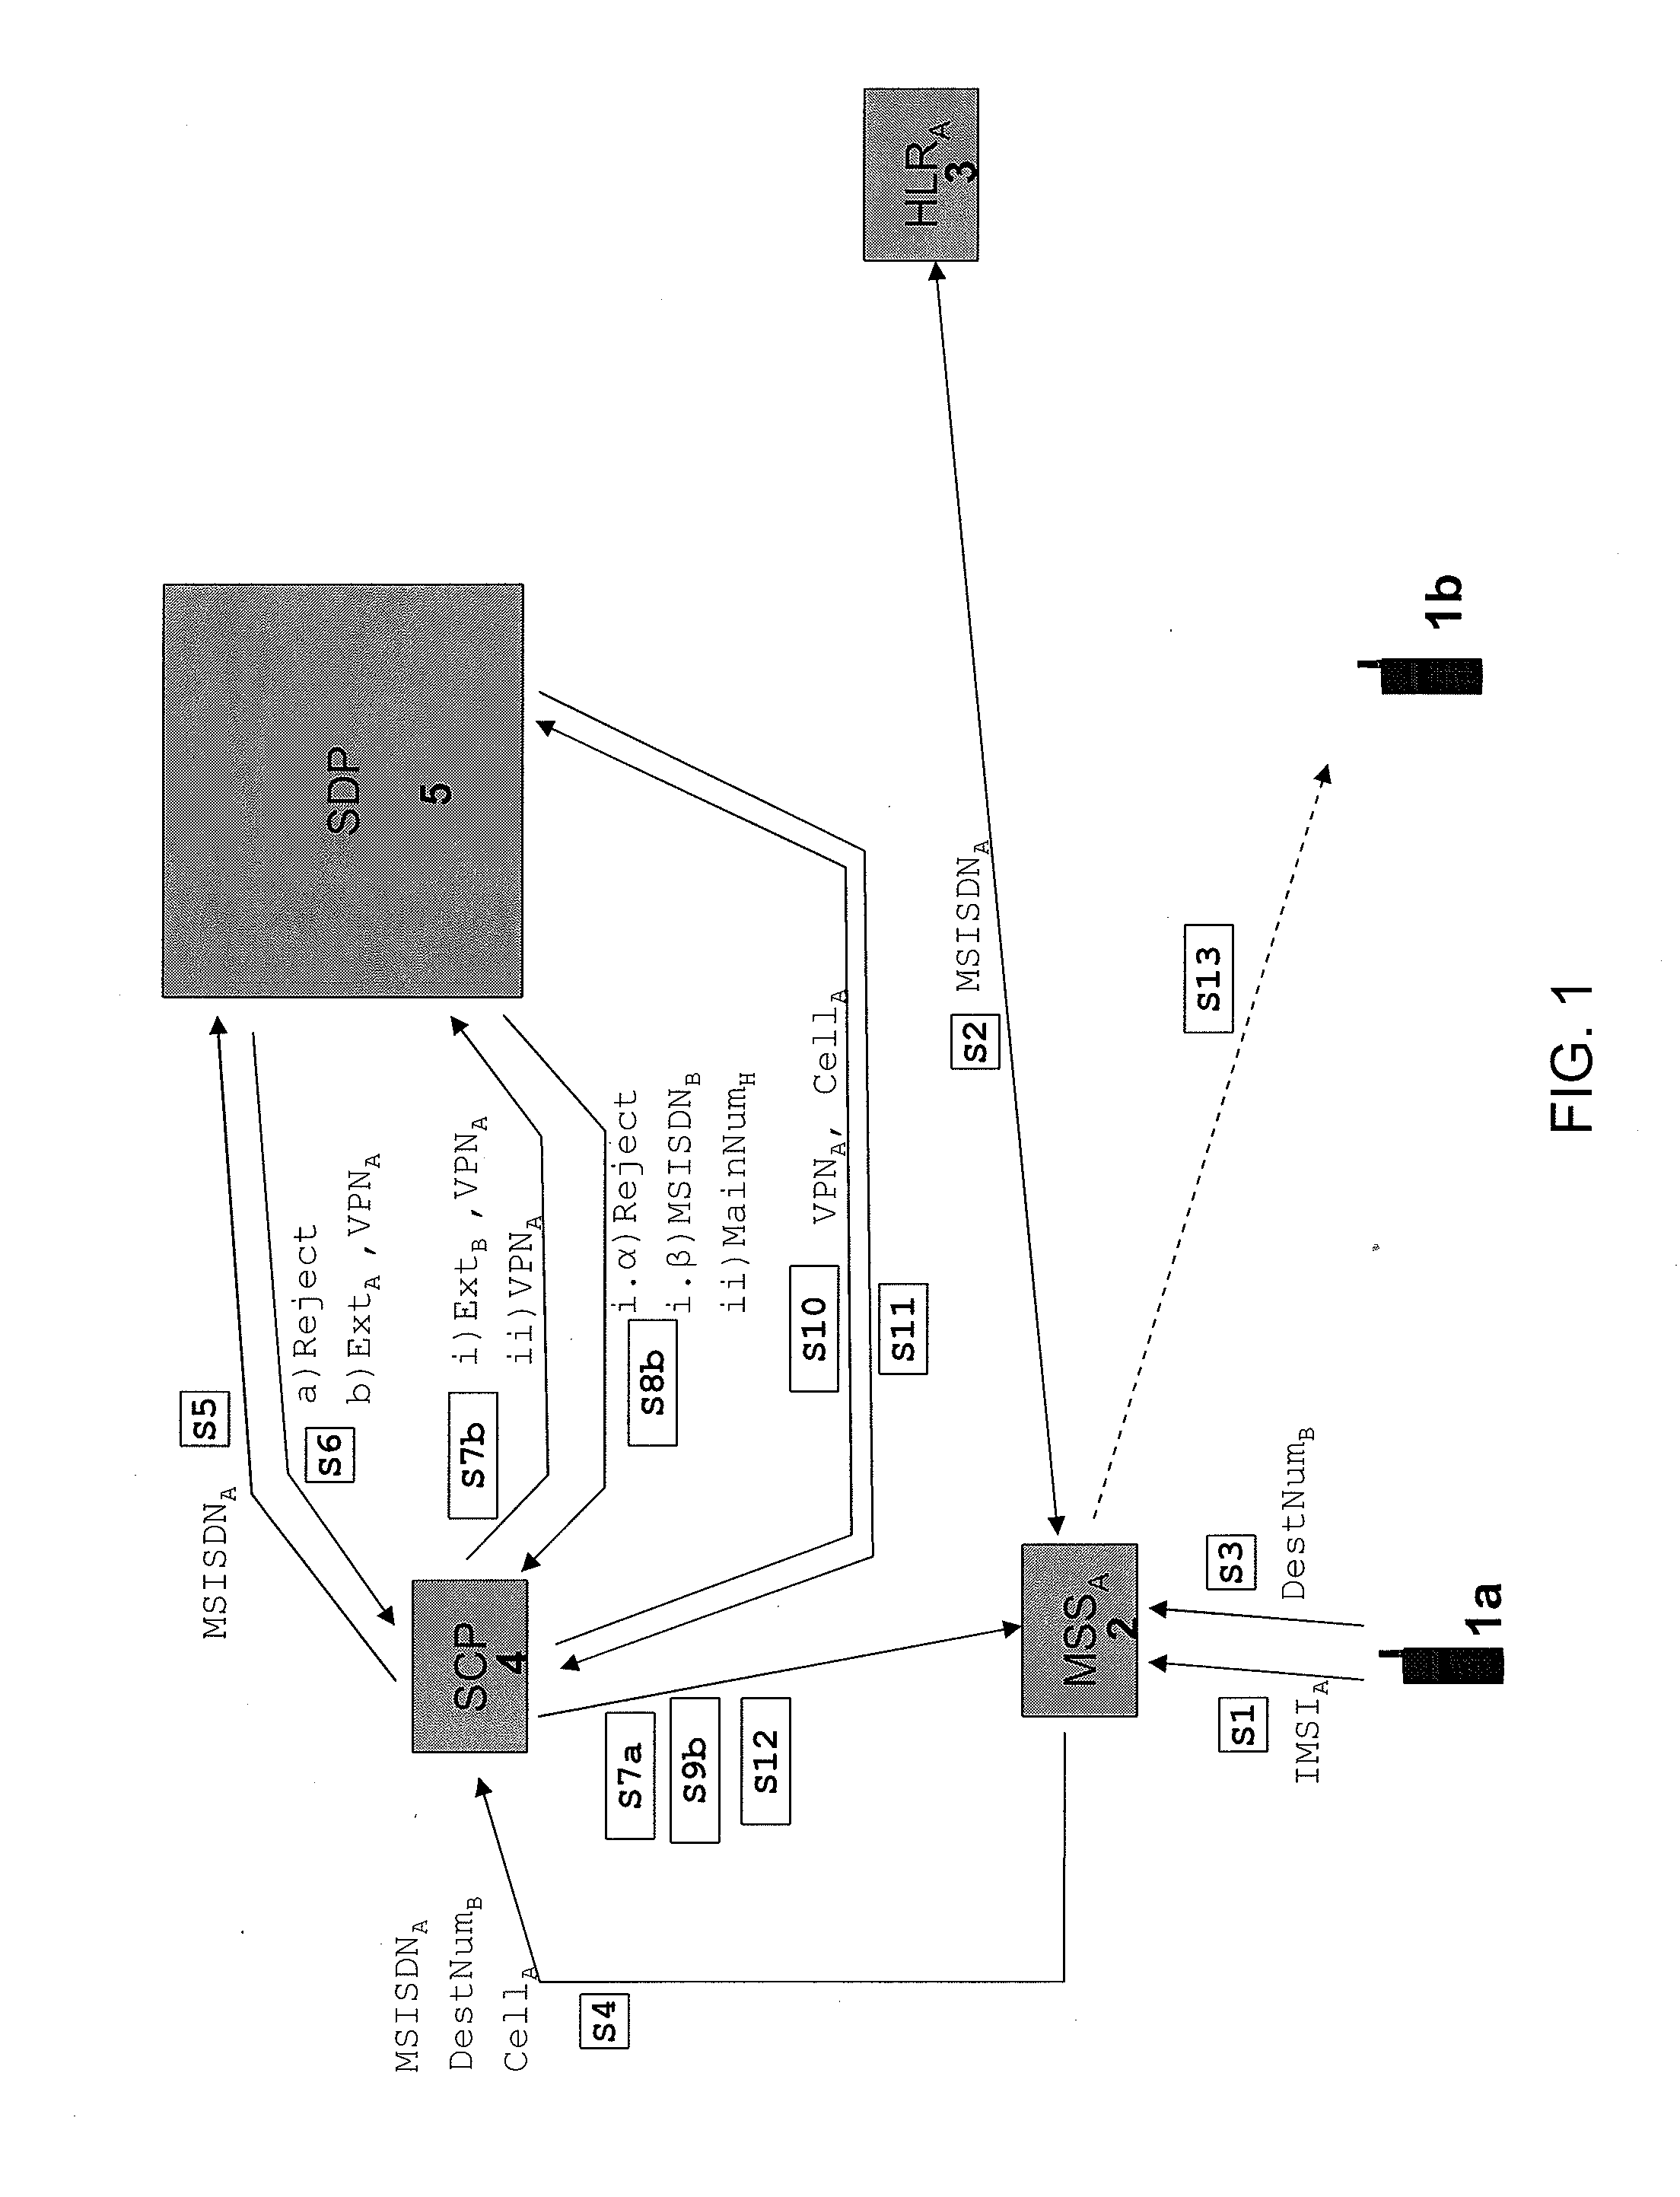 System and Method for Providing Mobile Based Services for Hotel PBX